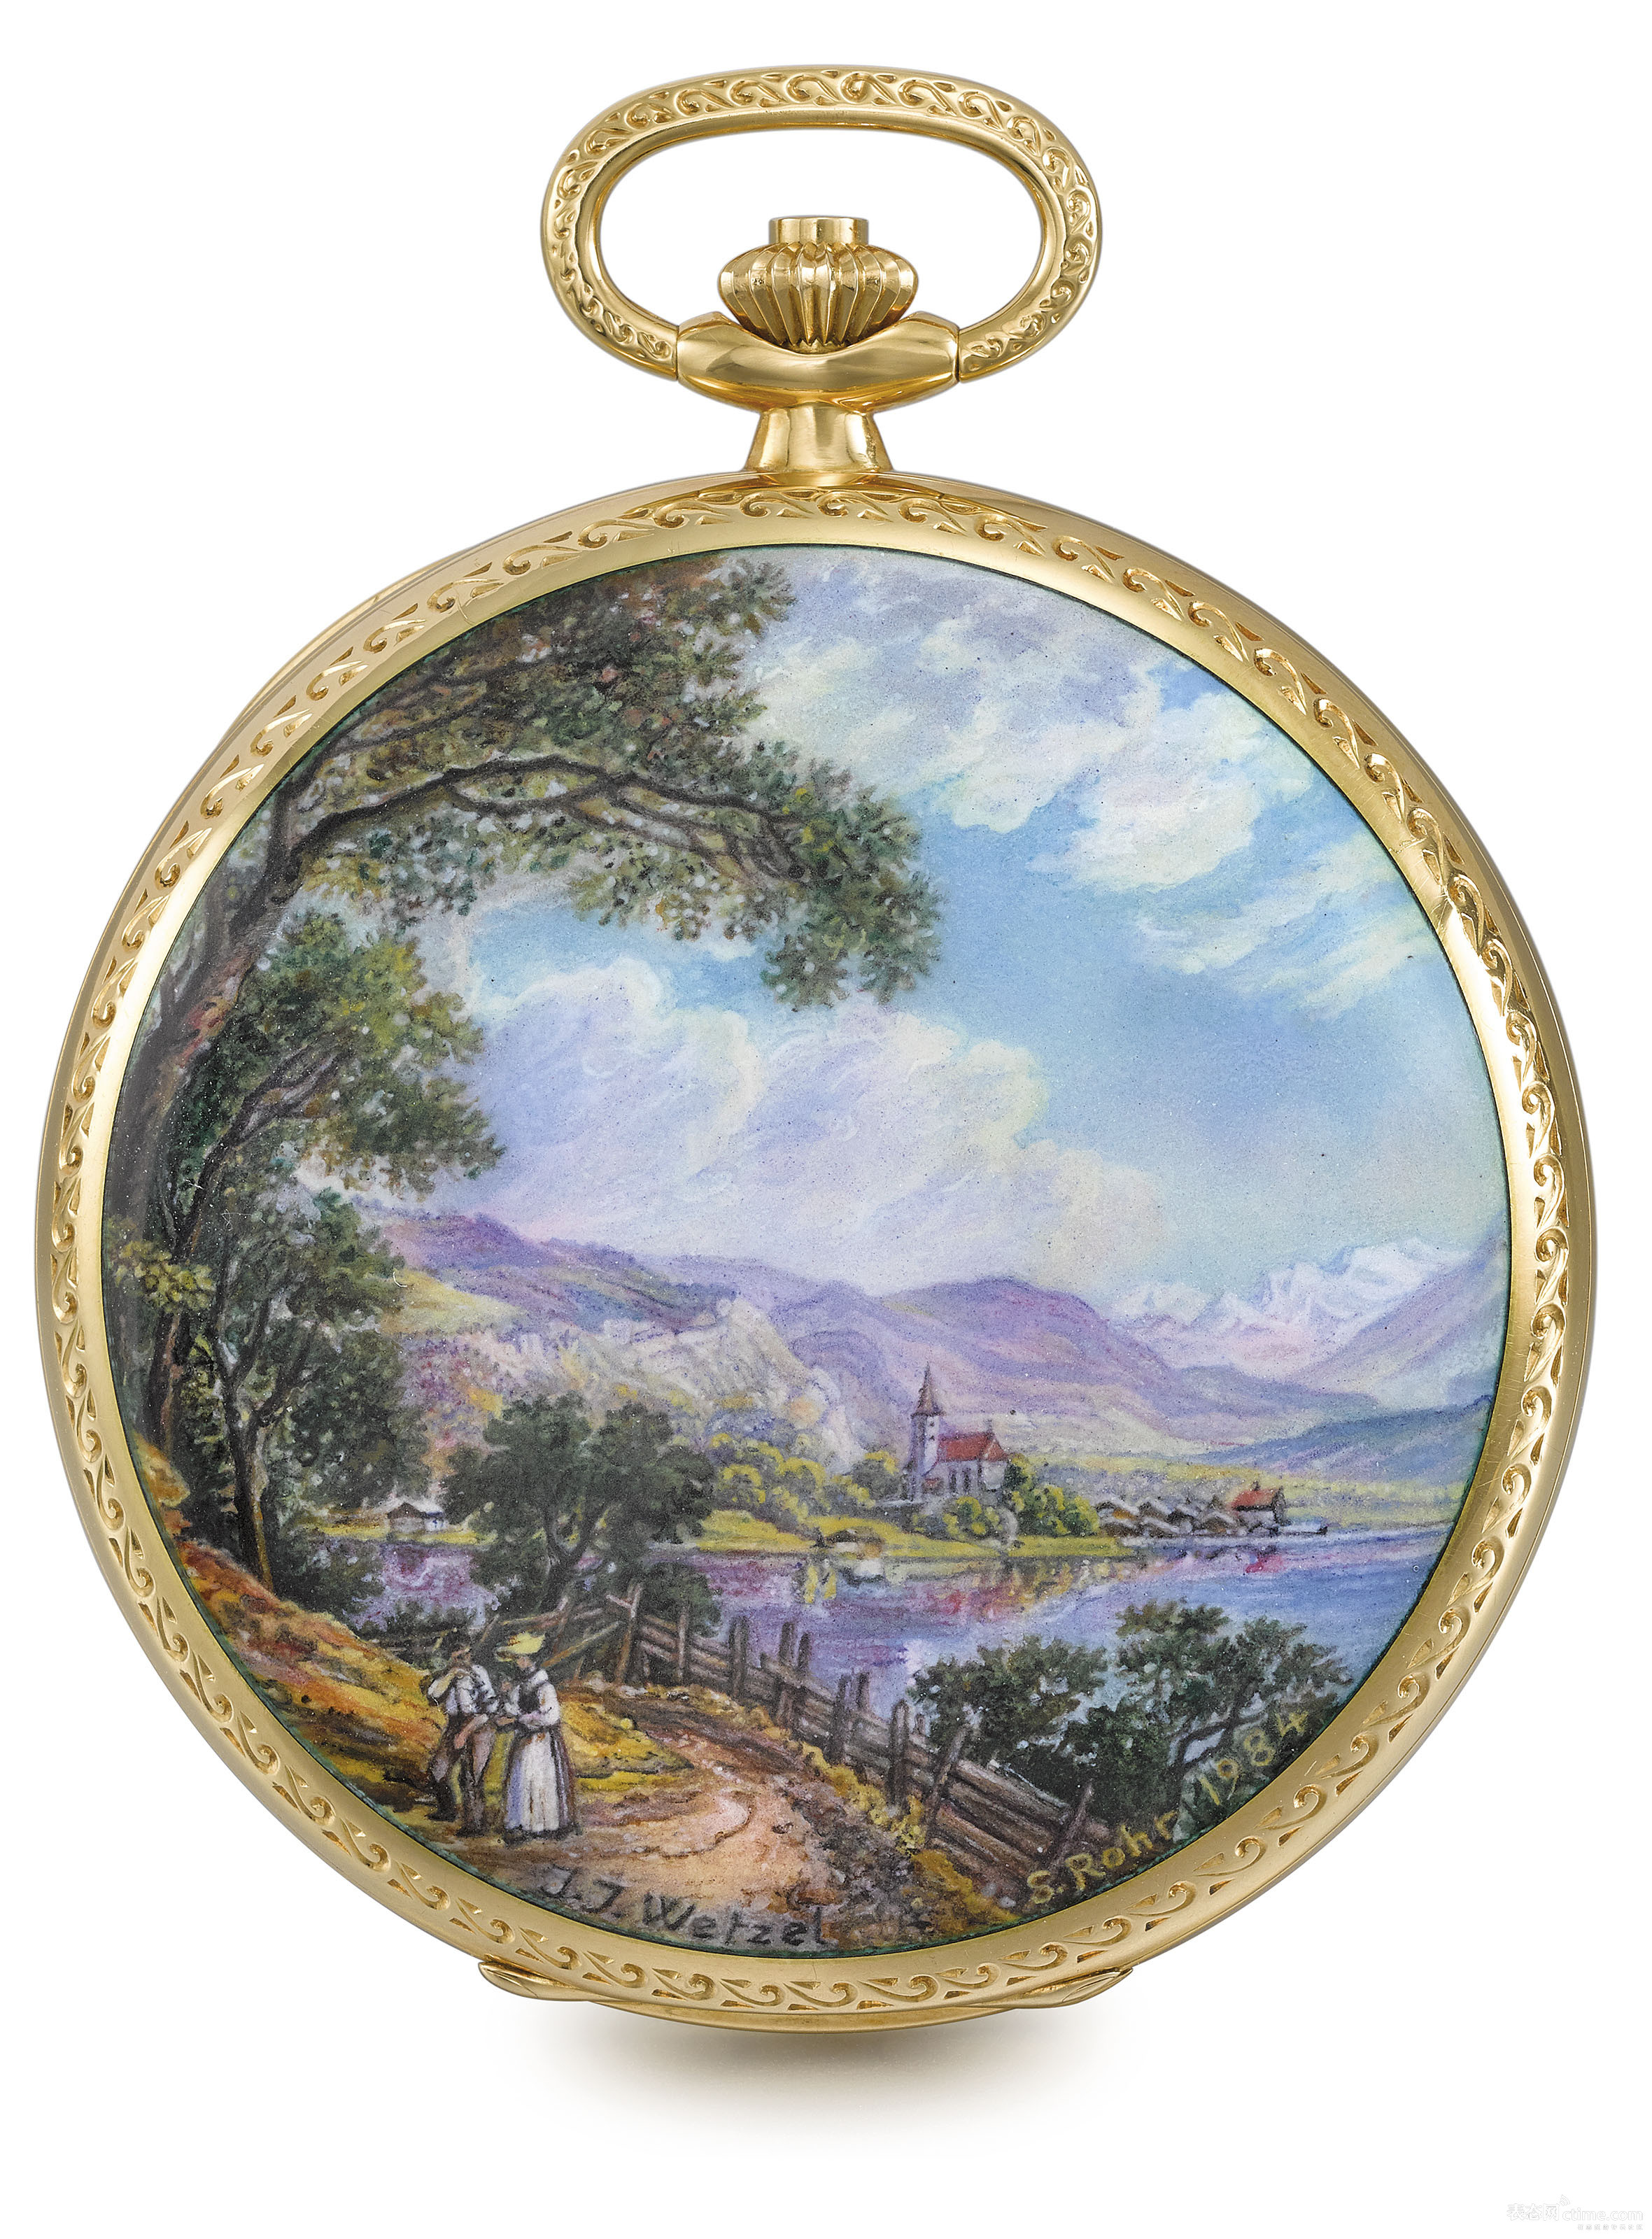 2019_GNV_17435_0065_000(patek_philippe_an_extremely_fine_and_unique_18k_gold_hunter_case_keyle).jpg